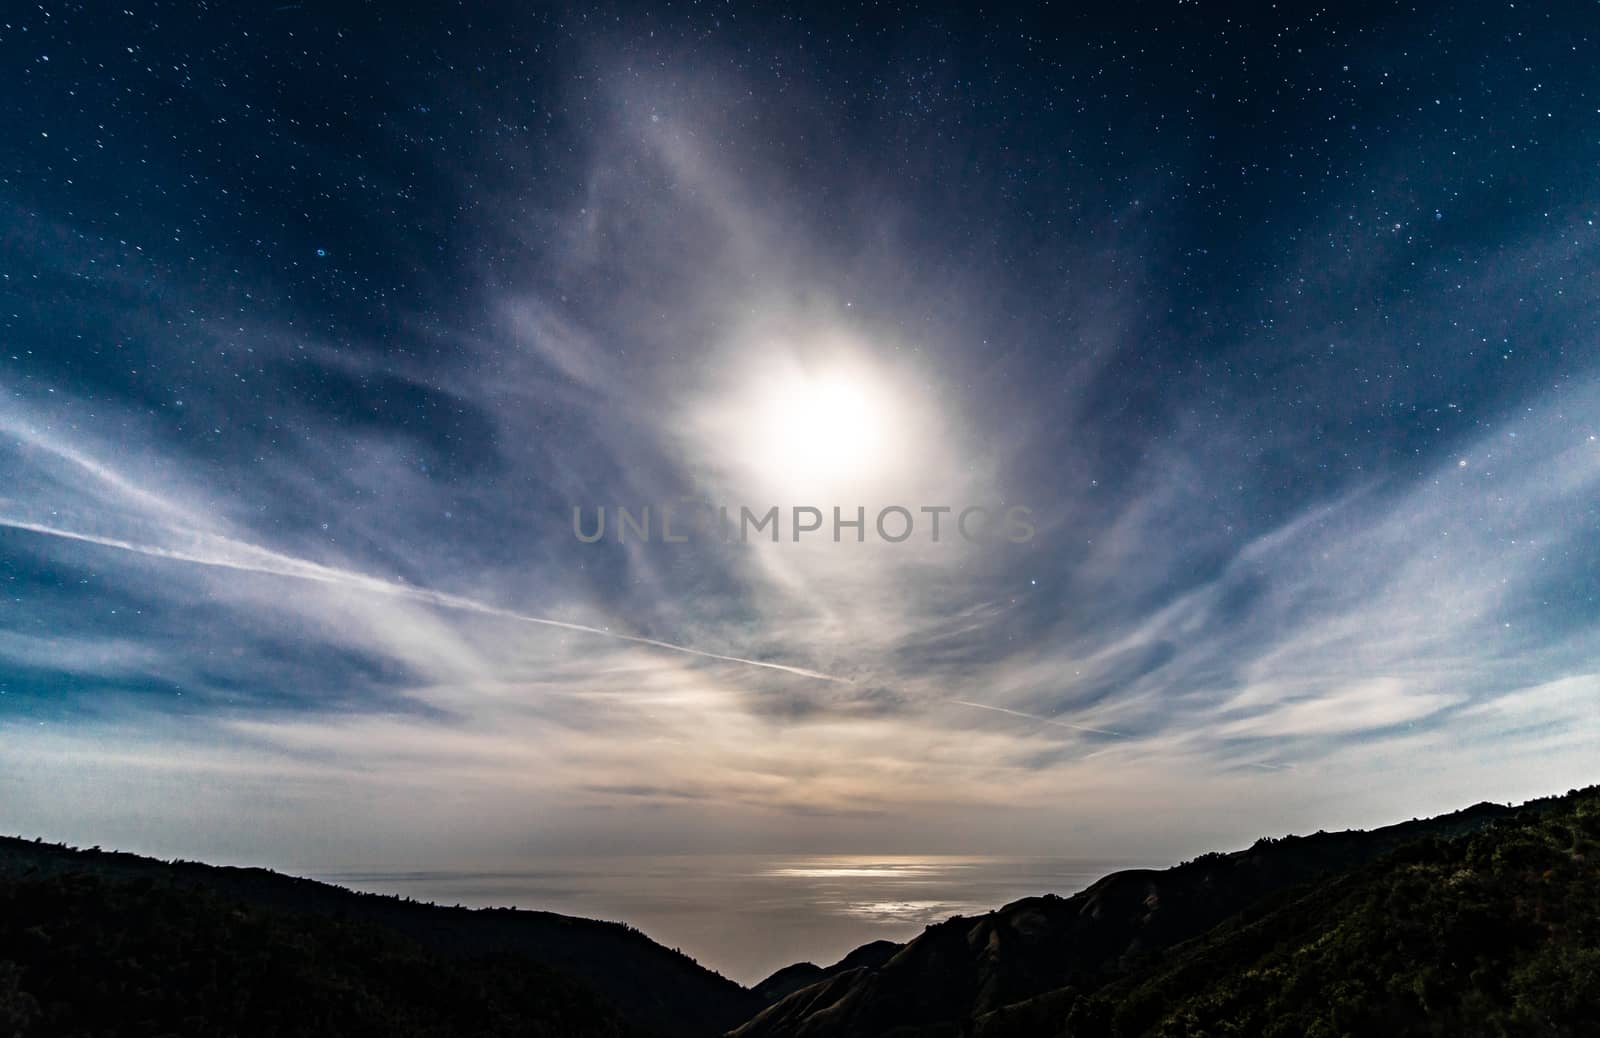 HDR photo of a moonlit California starry night sky with full moon behind clouds